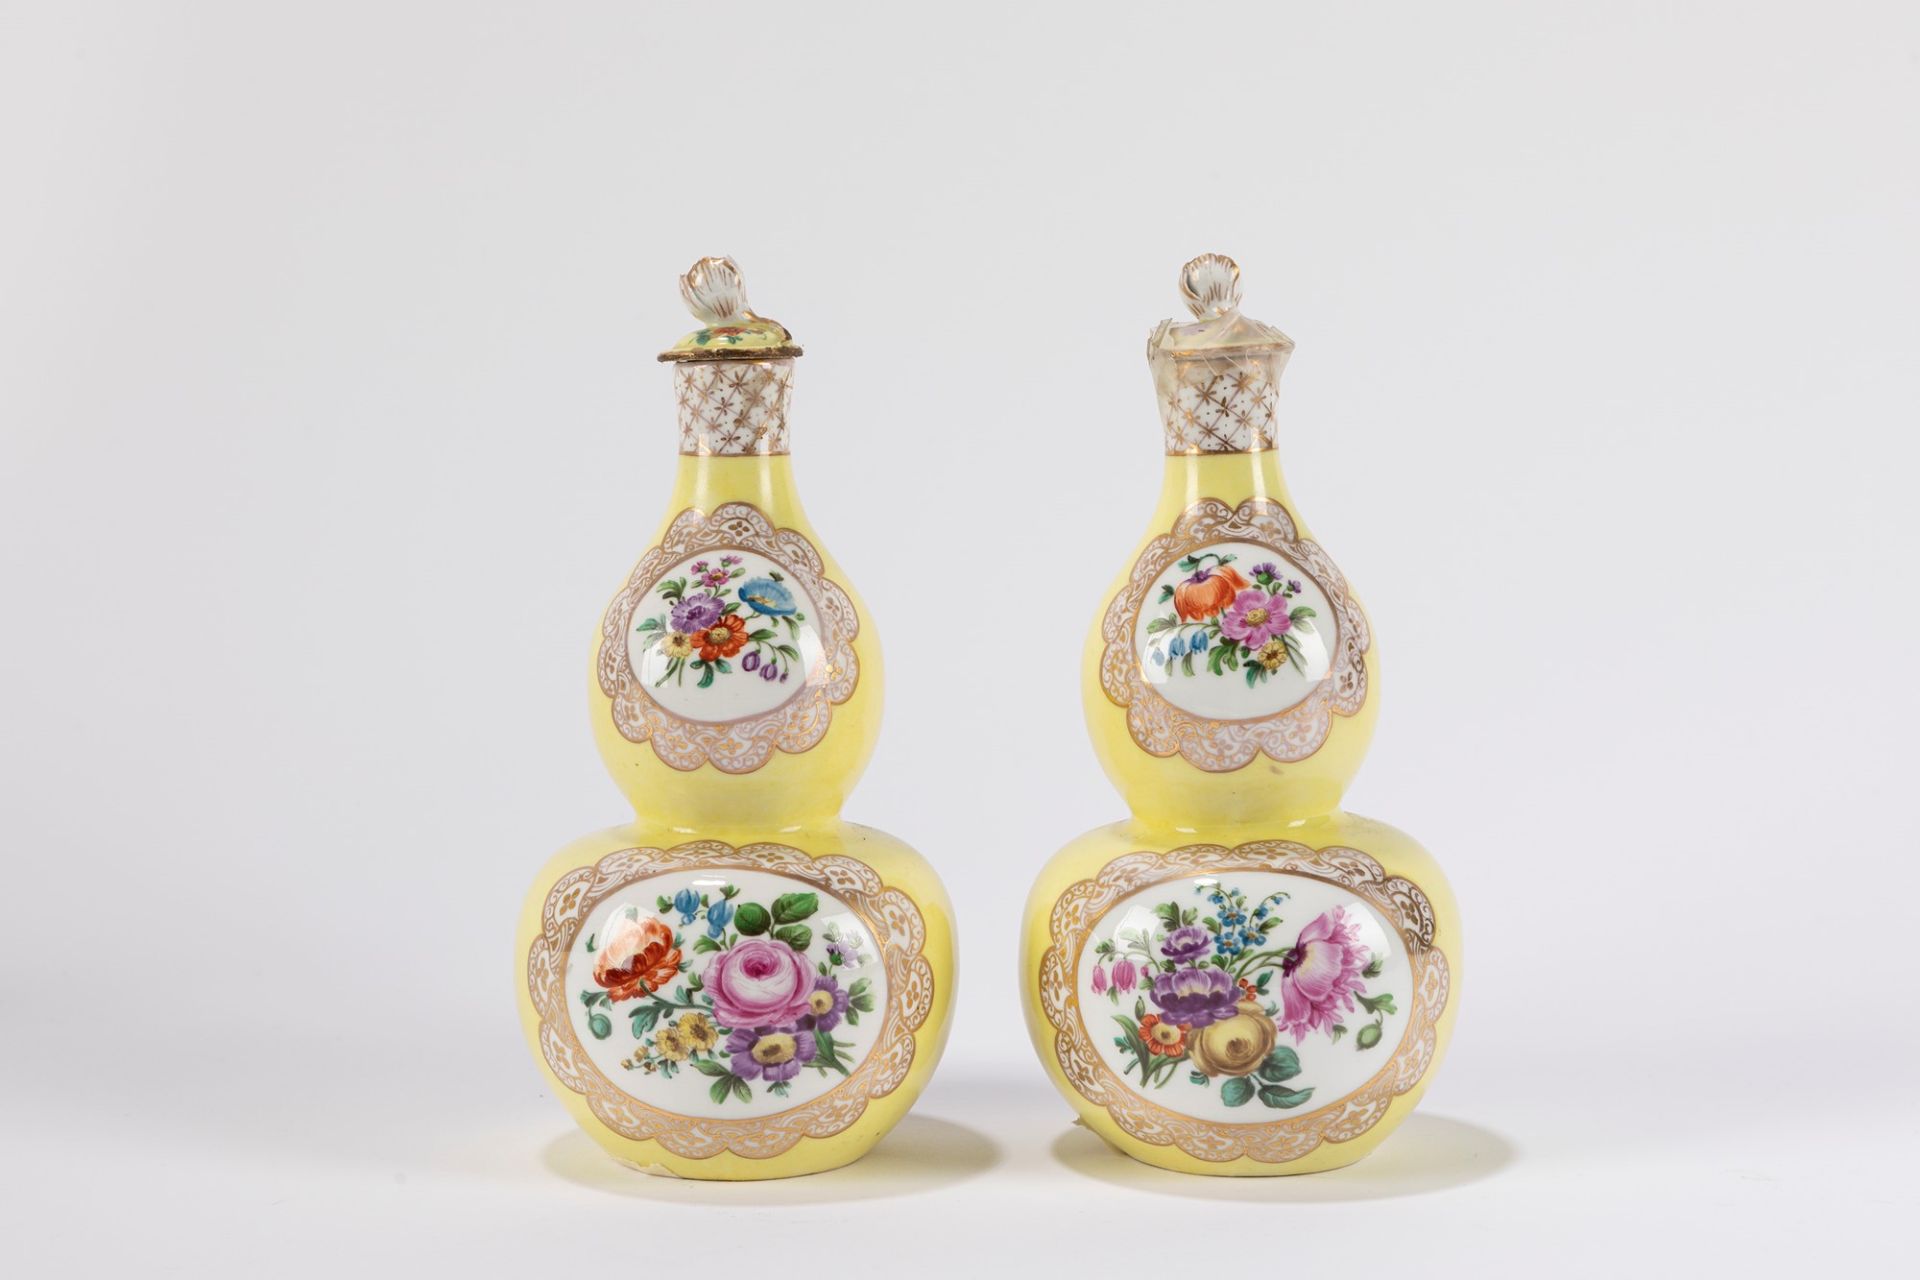 Pair of double gourd vases in yellow porcelain; early 20th century